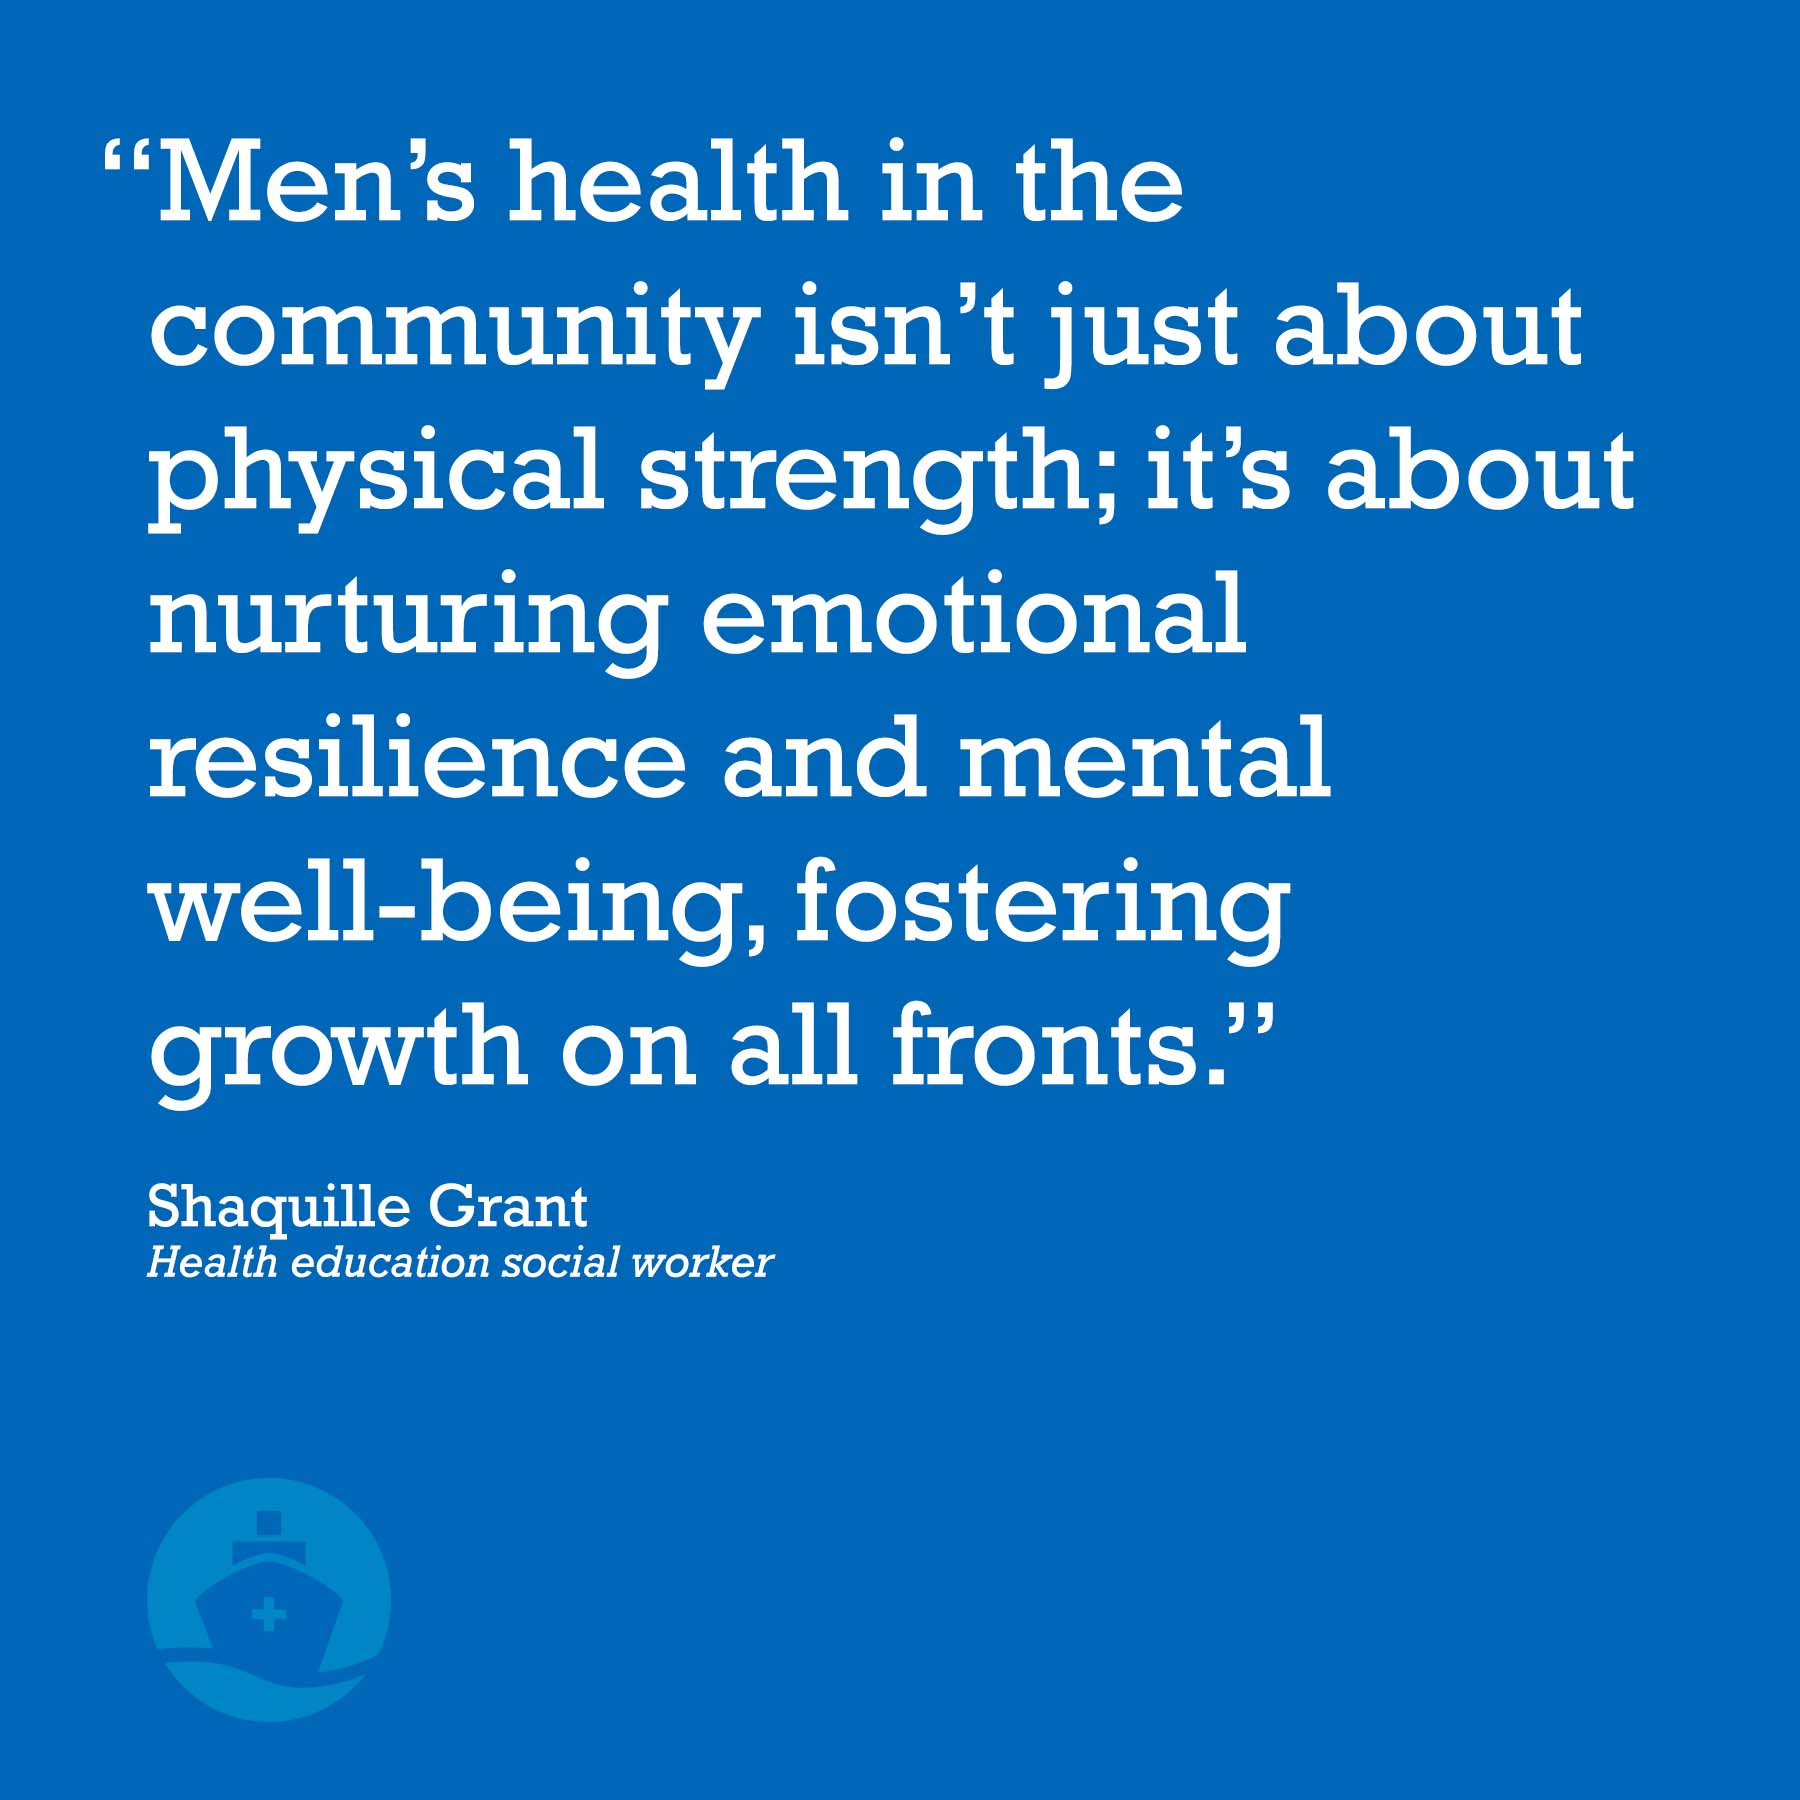 "Men's health in the community isn't just about physical strength; it's about nurturing emotional resilience and mental well-being, fostering growth on all fronts." Shaquille Grant, health education social worker